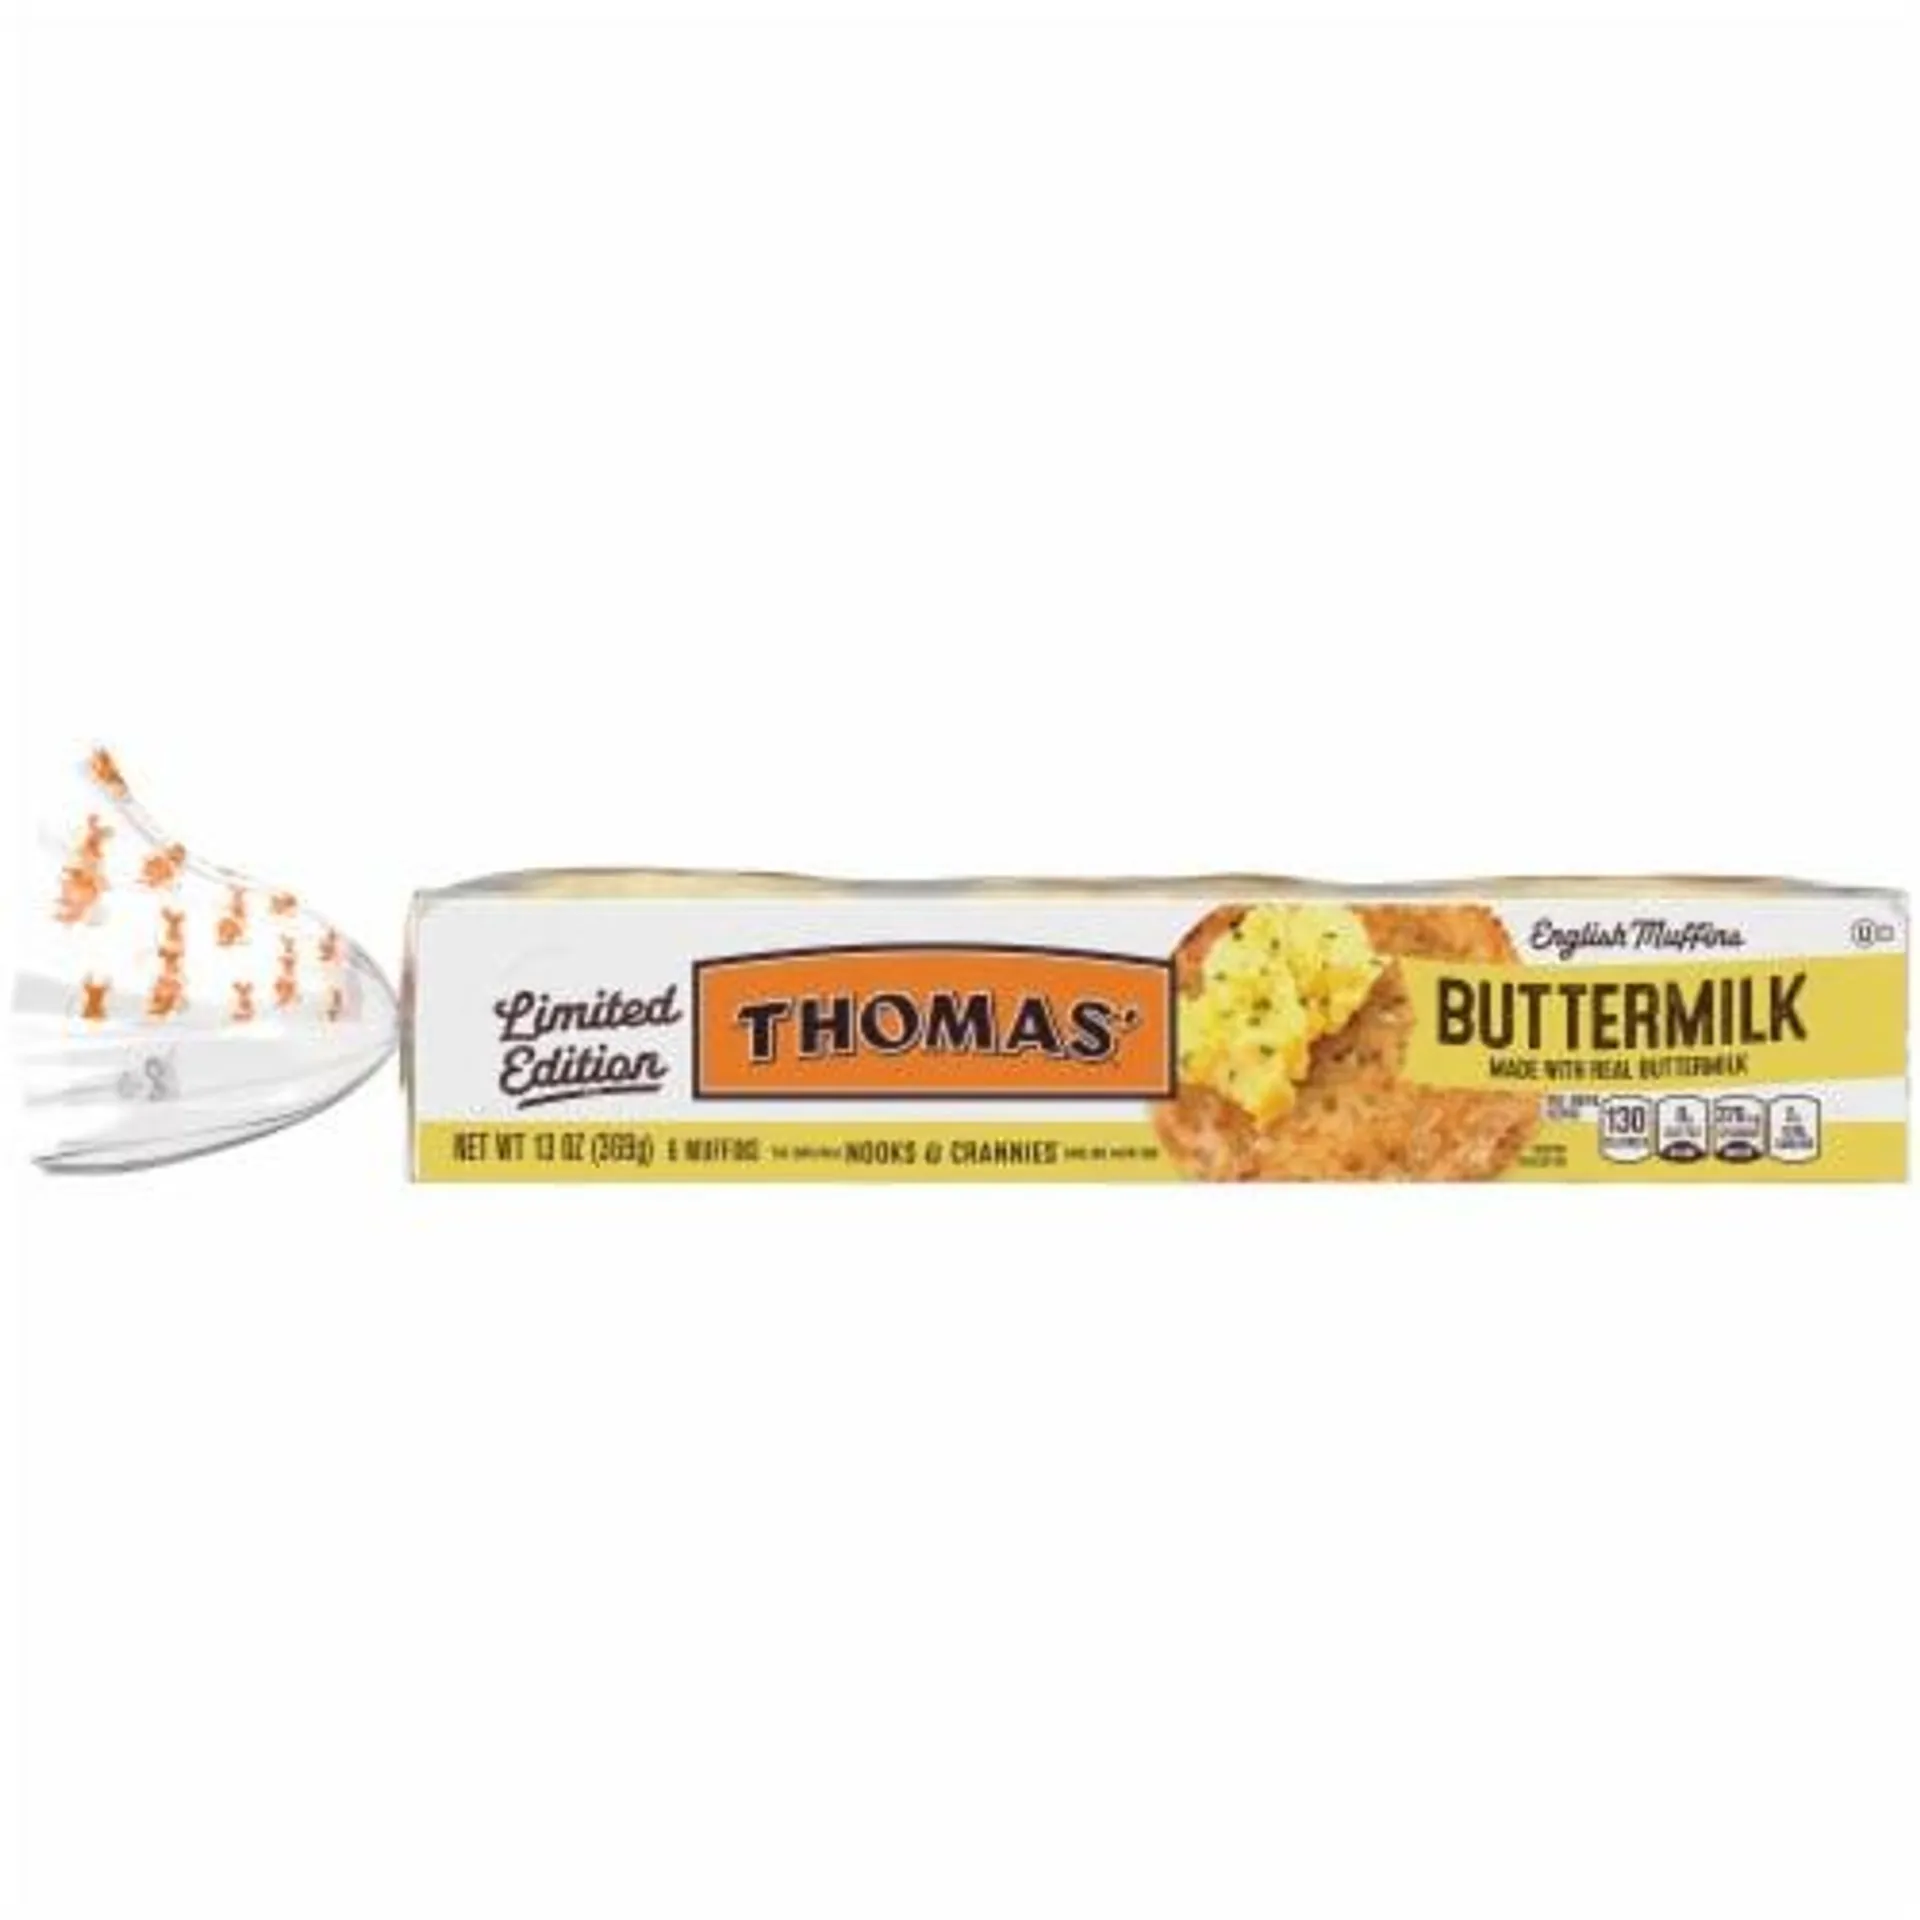 Thomas' Limited Edition Buttermilk English Muffins